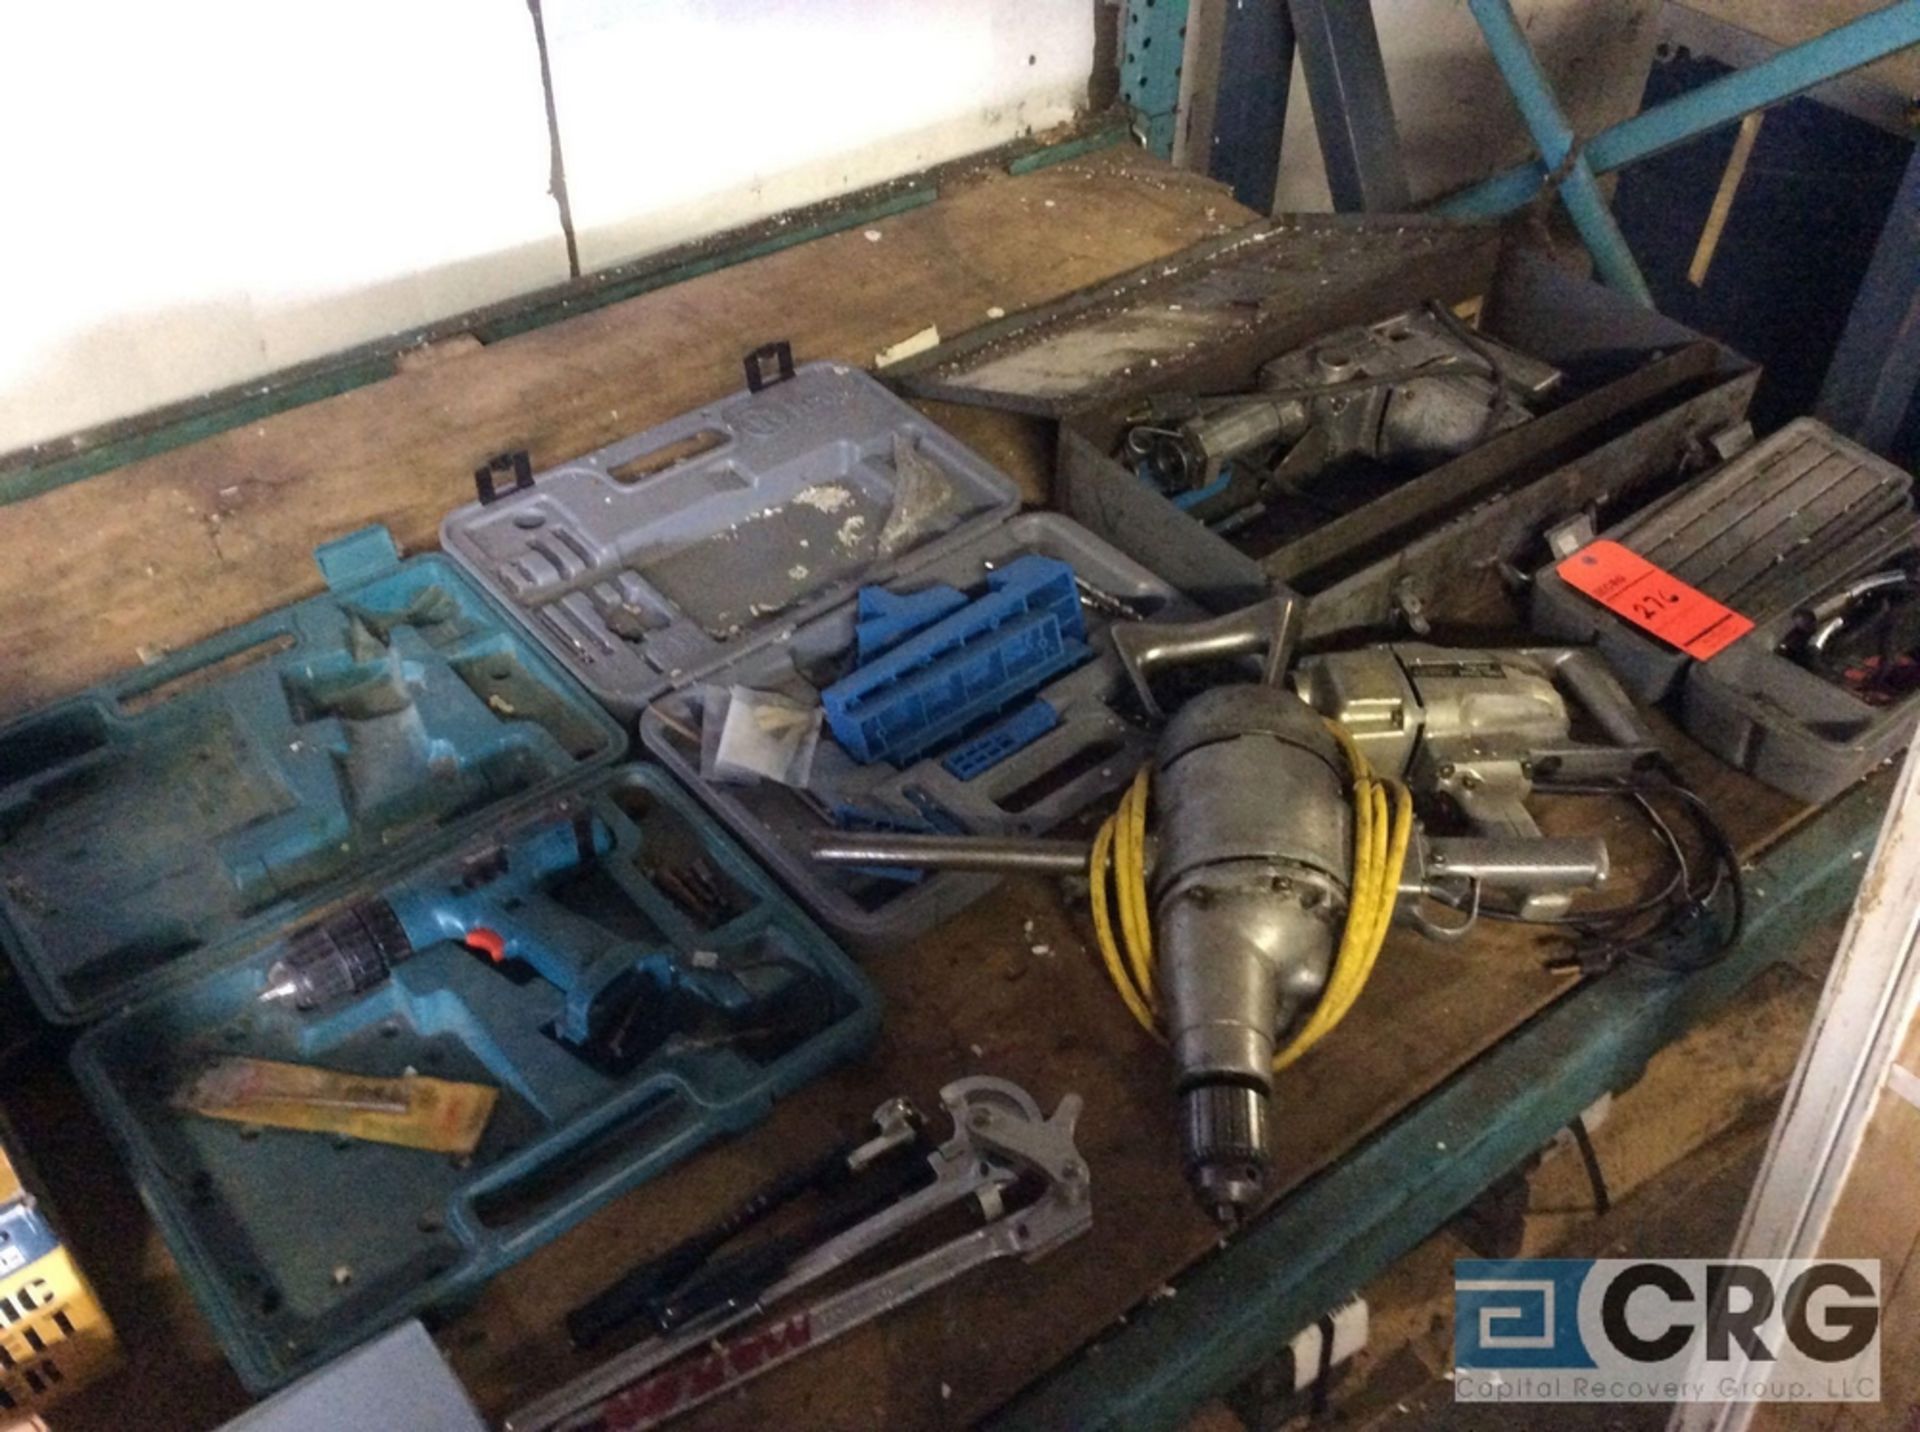 Lot of asst handtools including wrenches, hammer drills, puller set, etc. - Image 8 of 8